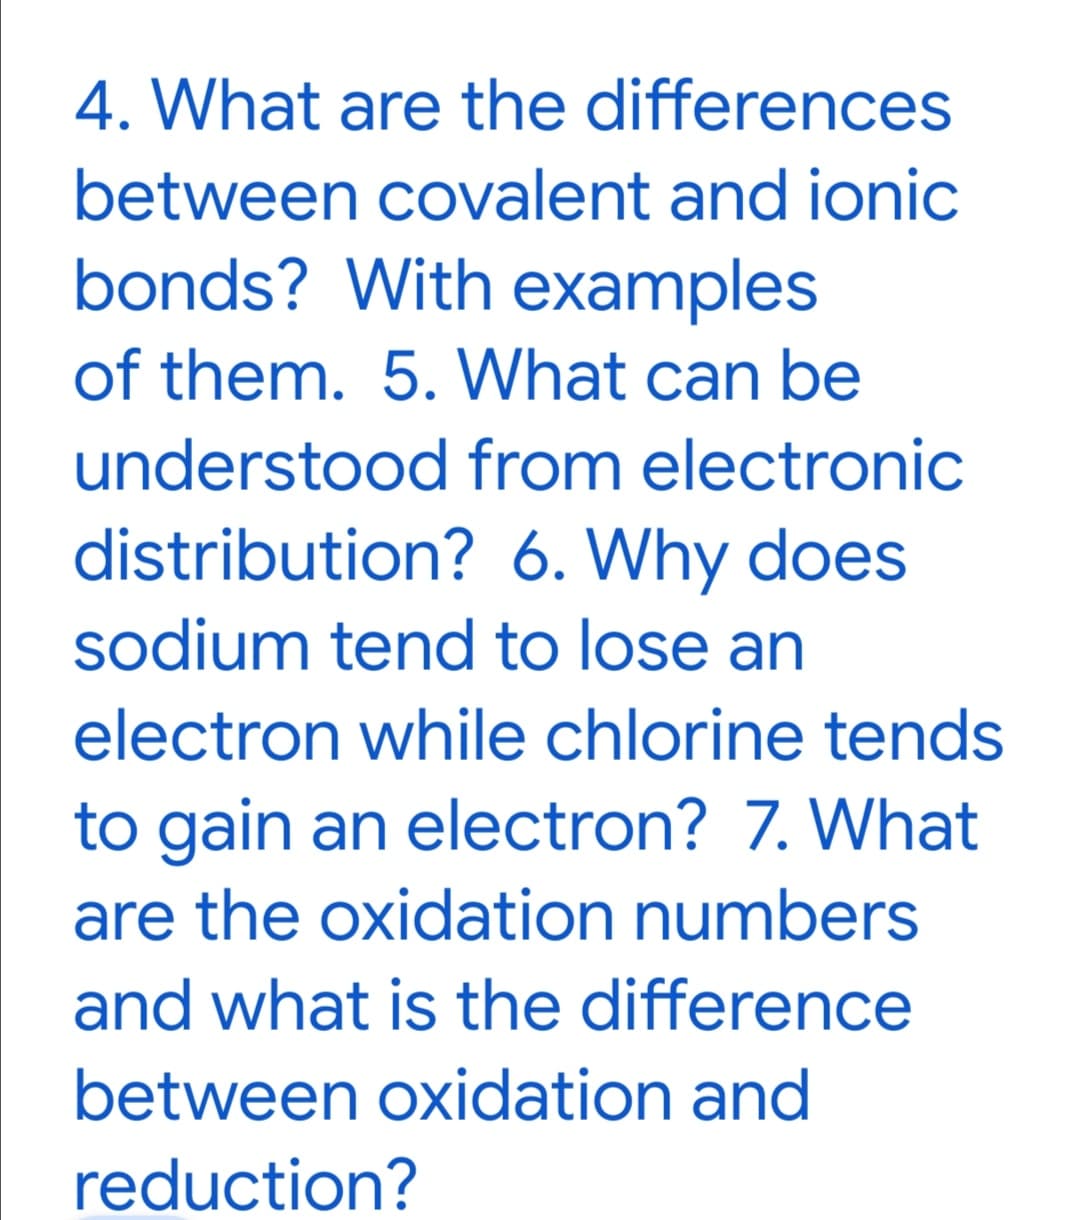 4. What are the differences
between covalent and ionic
bonds? With examples
of them. 5. What can be
understood from electronic
distribution? 6. Why does
sodium tend to lose an
electron while chlorine tends
to gain an electron? 7. What
are the oxidation numbers
and what is the difference
between oxidation and
reduction?
